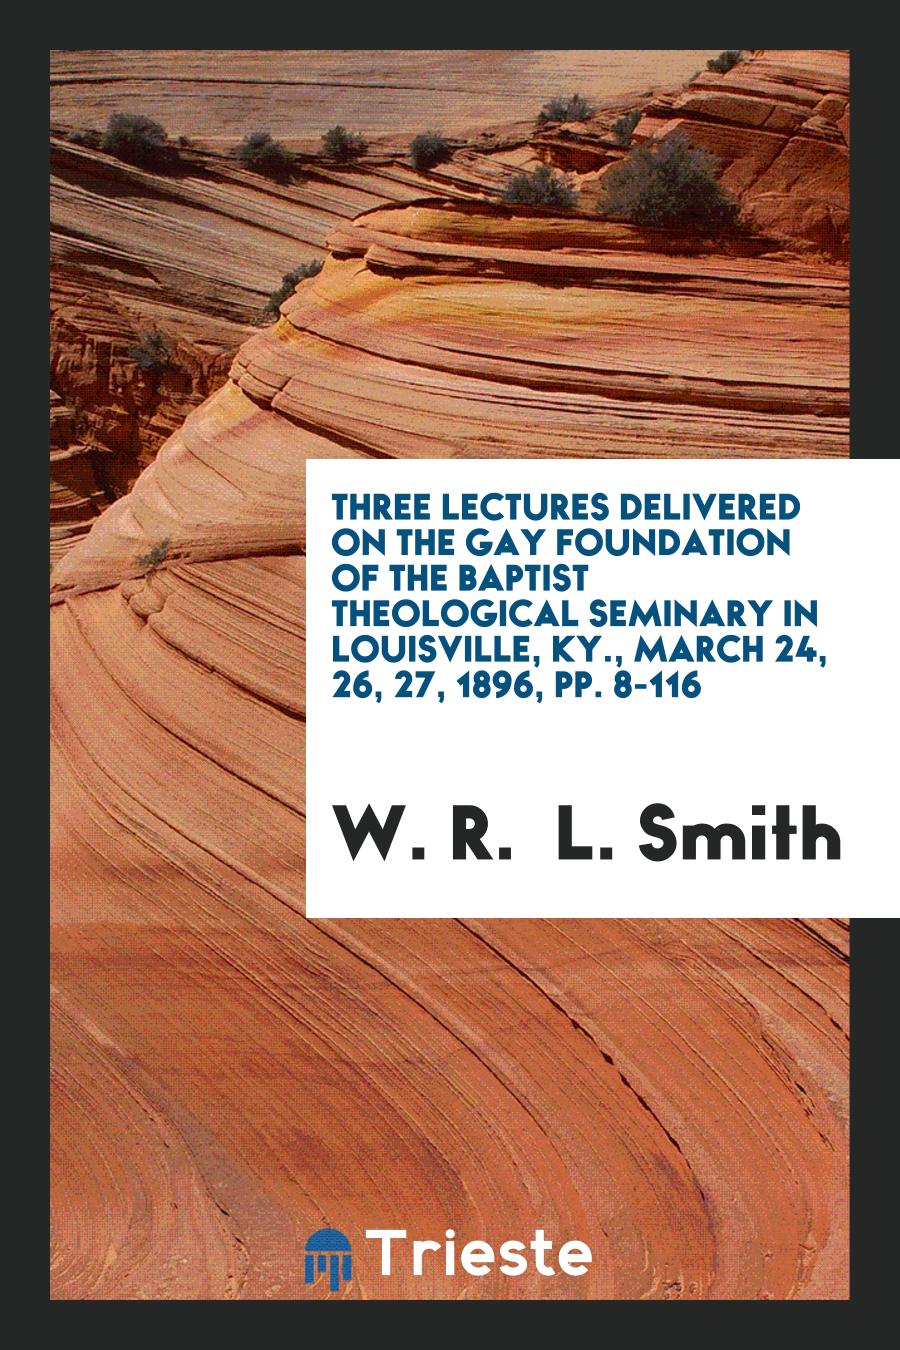 Three Lectures Delivered on the Gay Foundation of the Baptist Theological Seminary in Louisville, Ky., March 24, 26, 27, 1896, pp. 8-116